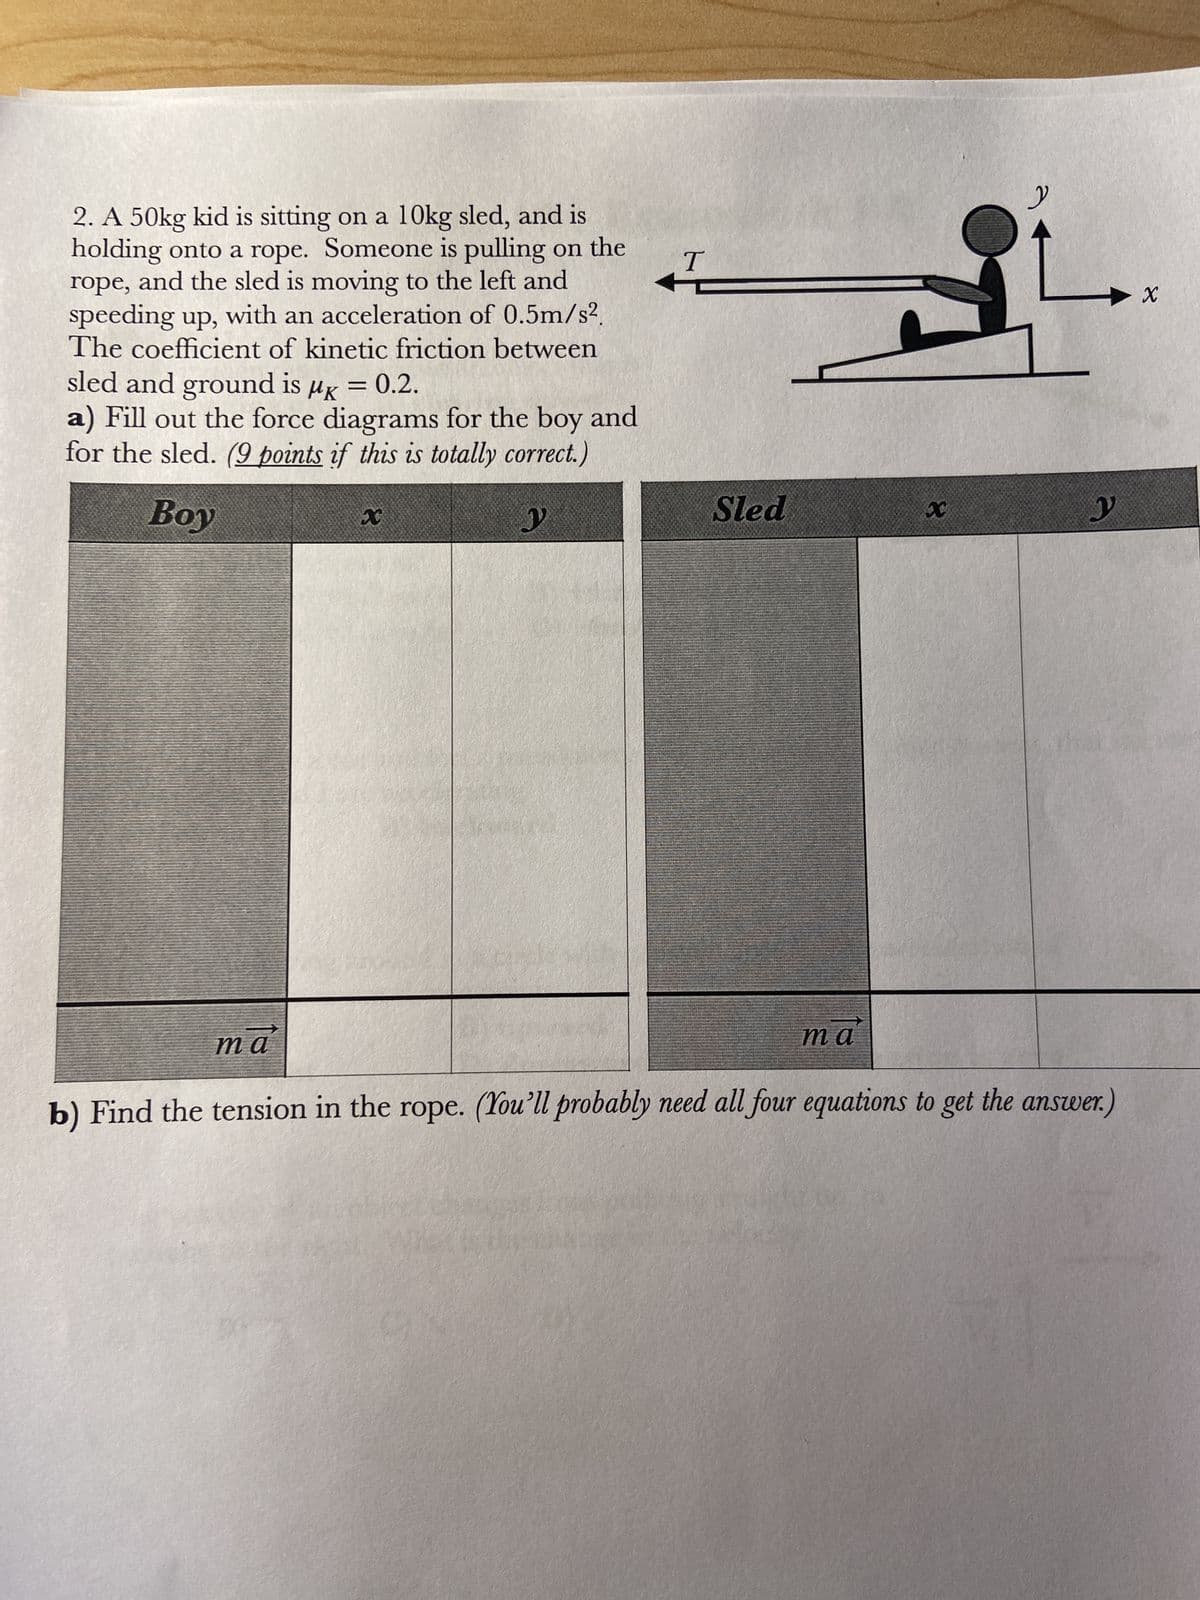 2. A 50kg kid is sitting on a 10kg sled, and is
holding onto a rope. Someone is pulling on the
rope, and the sled is moving to the left and
speeding up, with an acceleration of 0.5m/s².
The coefficient of kinetic friction between
sled and ground is μK = 0.2.
a) Fill out the force diagrams for the boy and
for the sled. (9 points if this is totally correct.)
Boy
y
ma
x
T
Sled
ma
x
2
y
b) Find the tension in the rope. (You'll probably need all four equations to get the answer.)
X